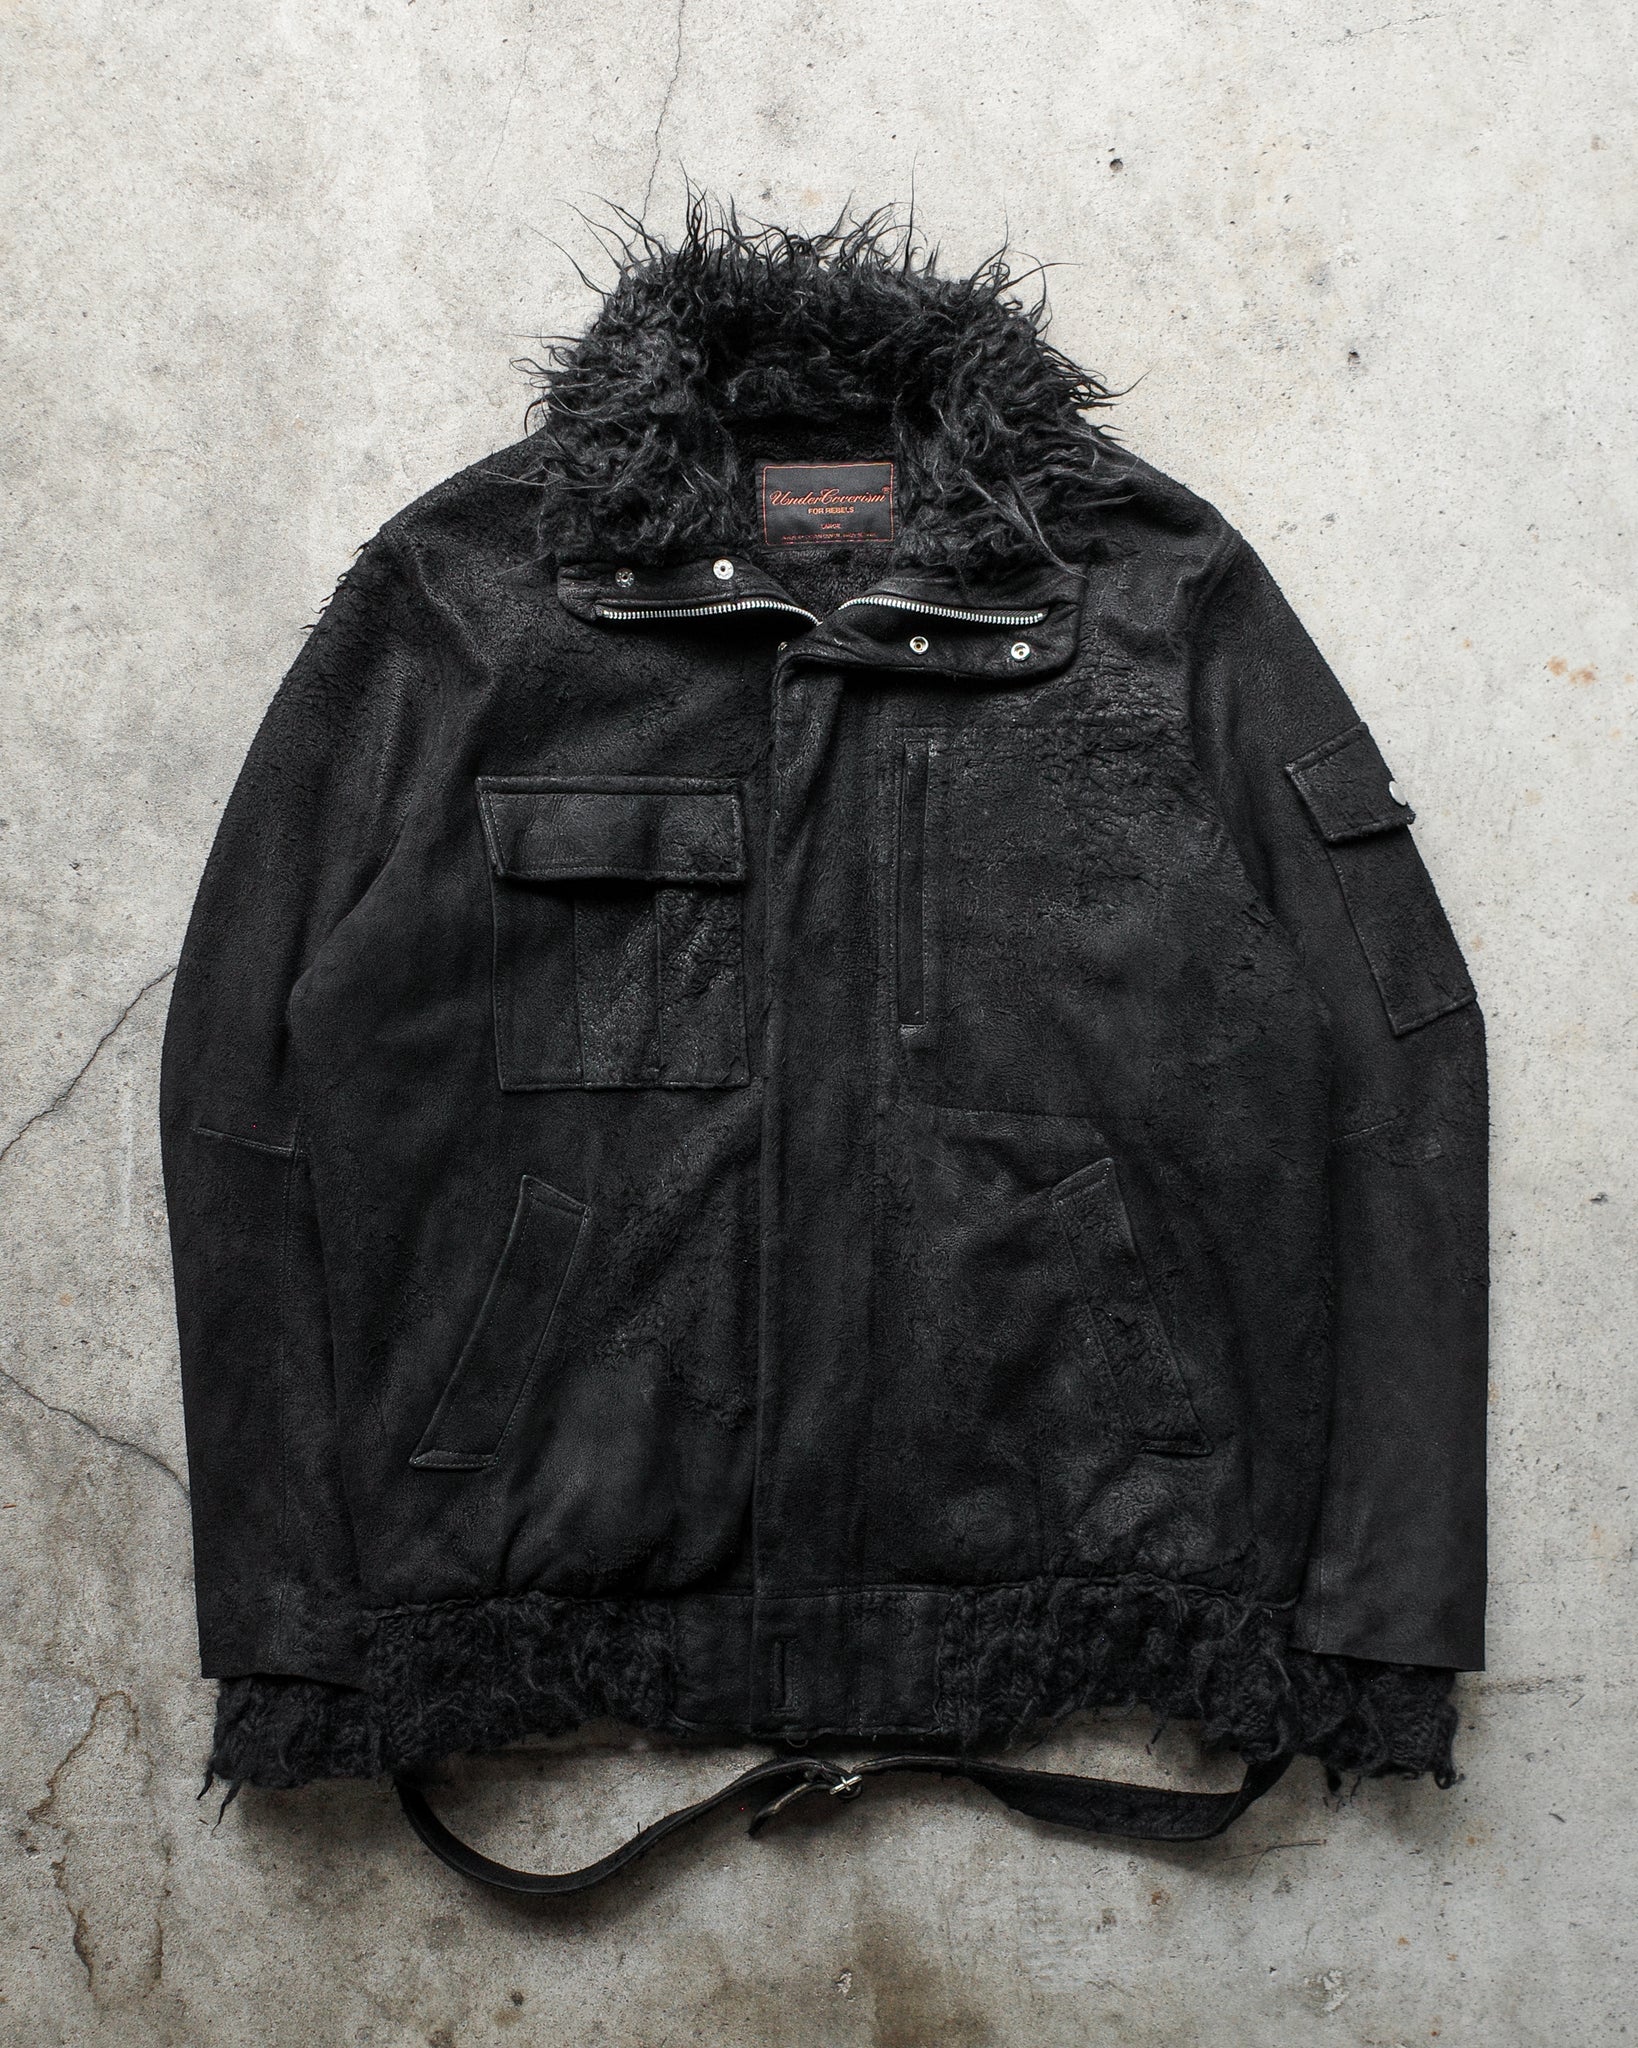 Undercover AW04 Blistered Lambskin Military Jacket